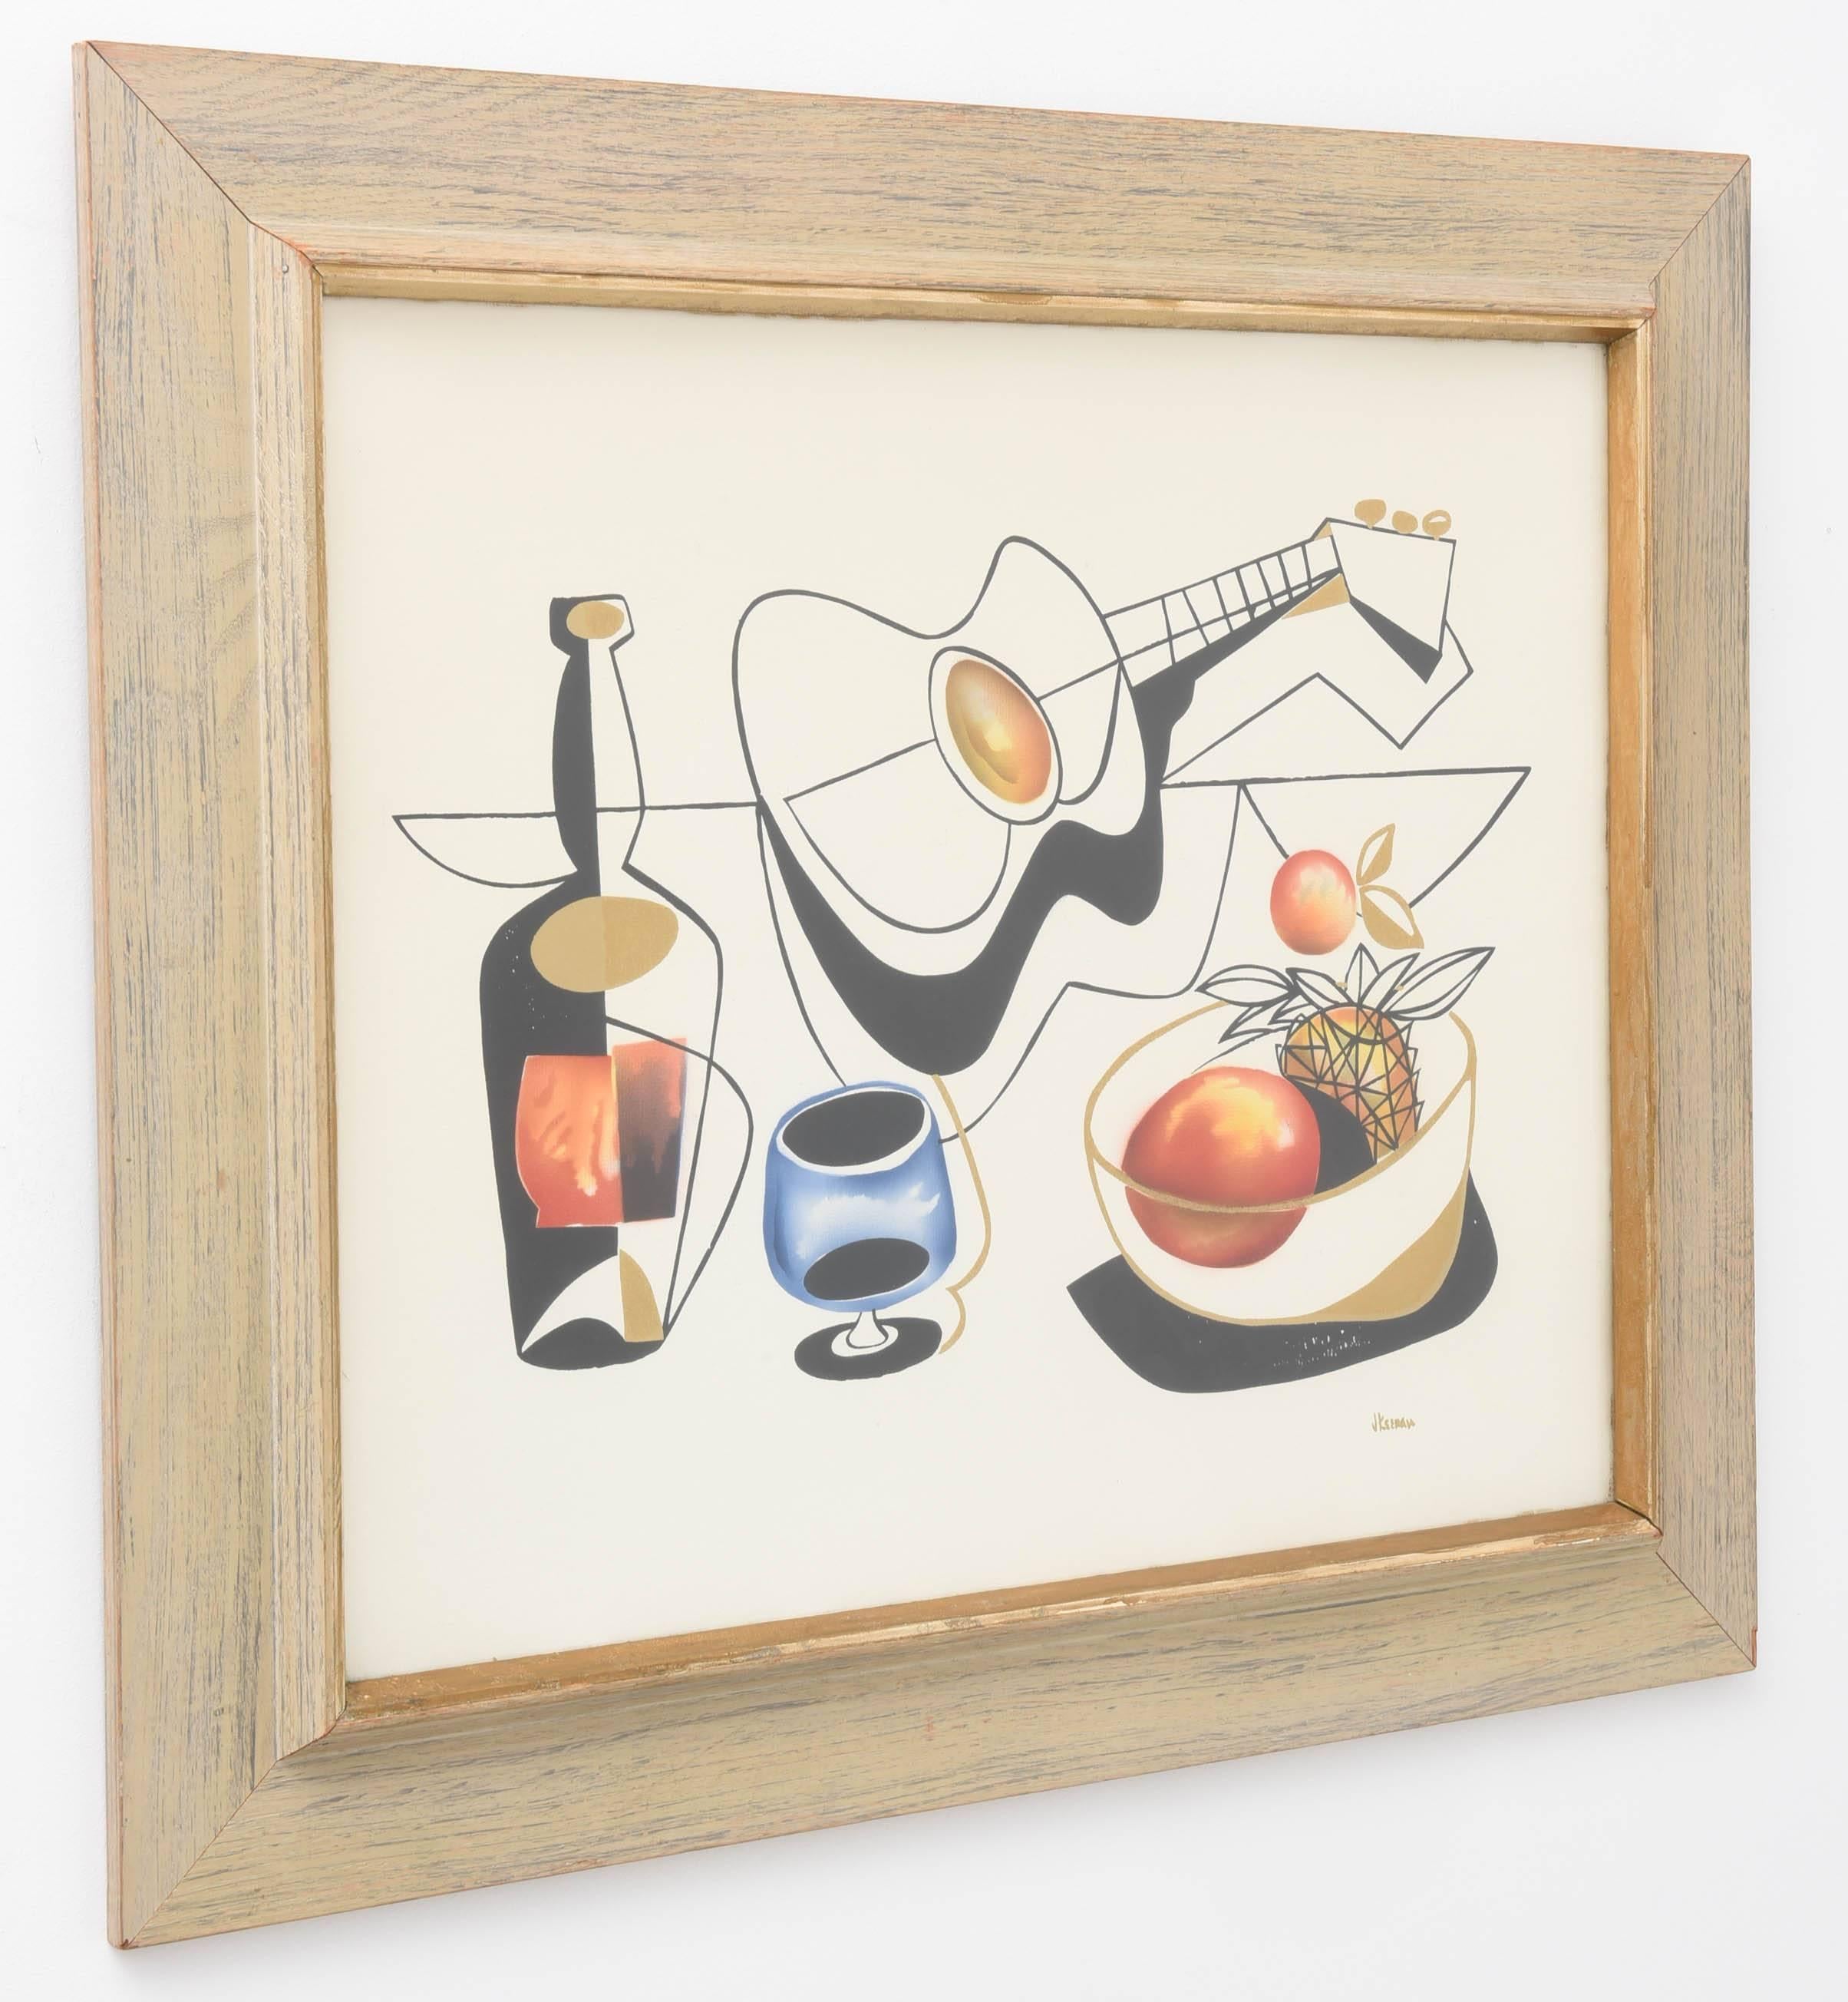 This Mid-Century Modern artwork was created in the 1950s by the British artist J. Keeman. Here Keeman has captured the "traditional still life" with his Midcentury interpretation. The piece is a mixed-media of watercolor and ink in colors